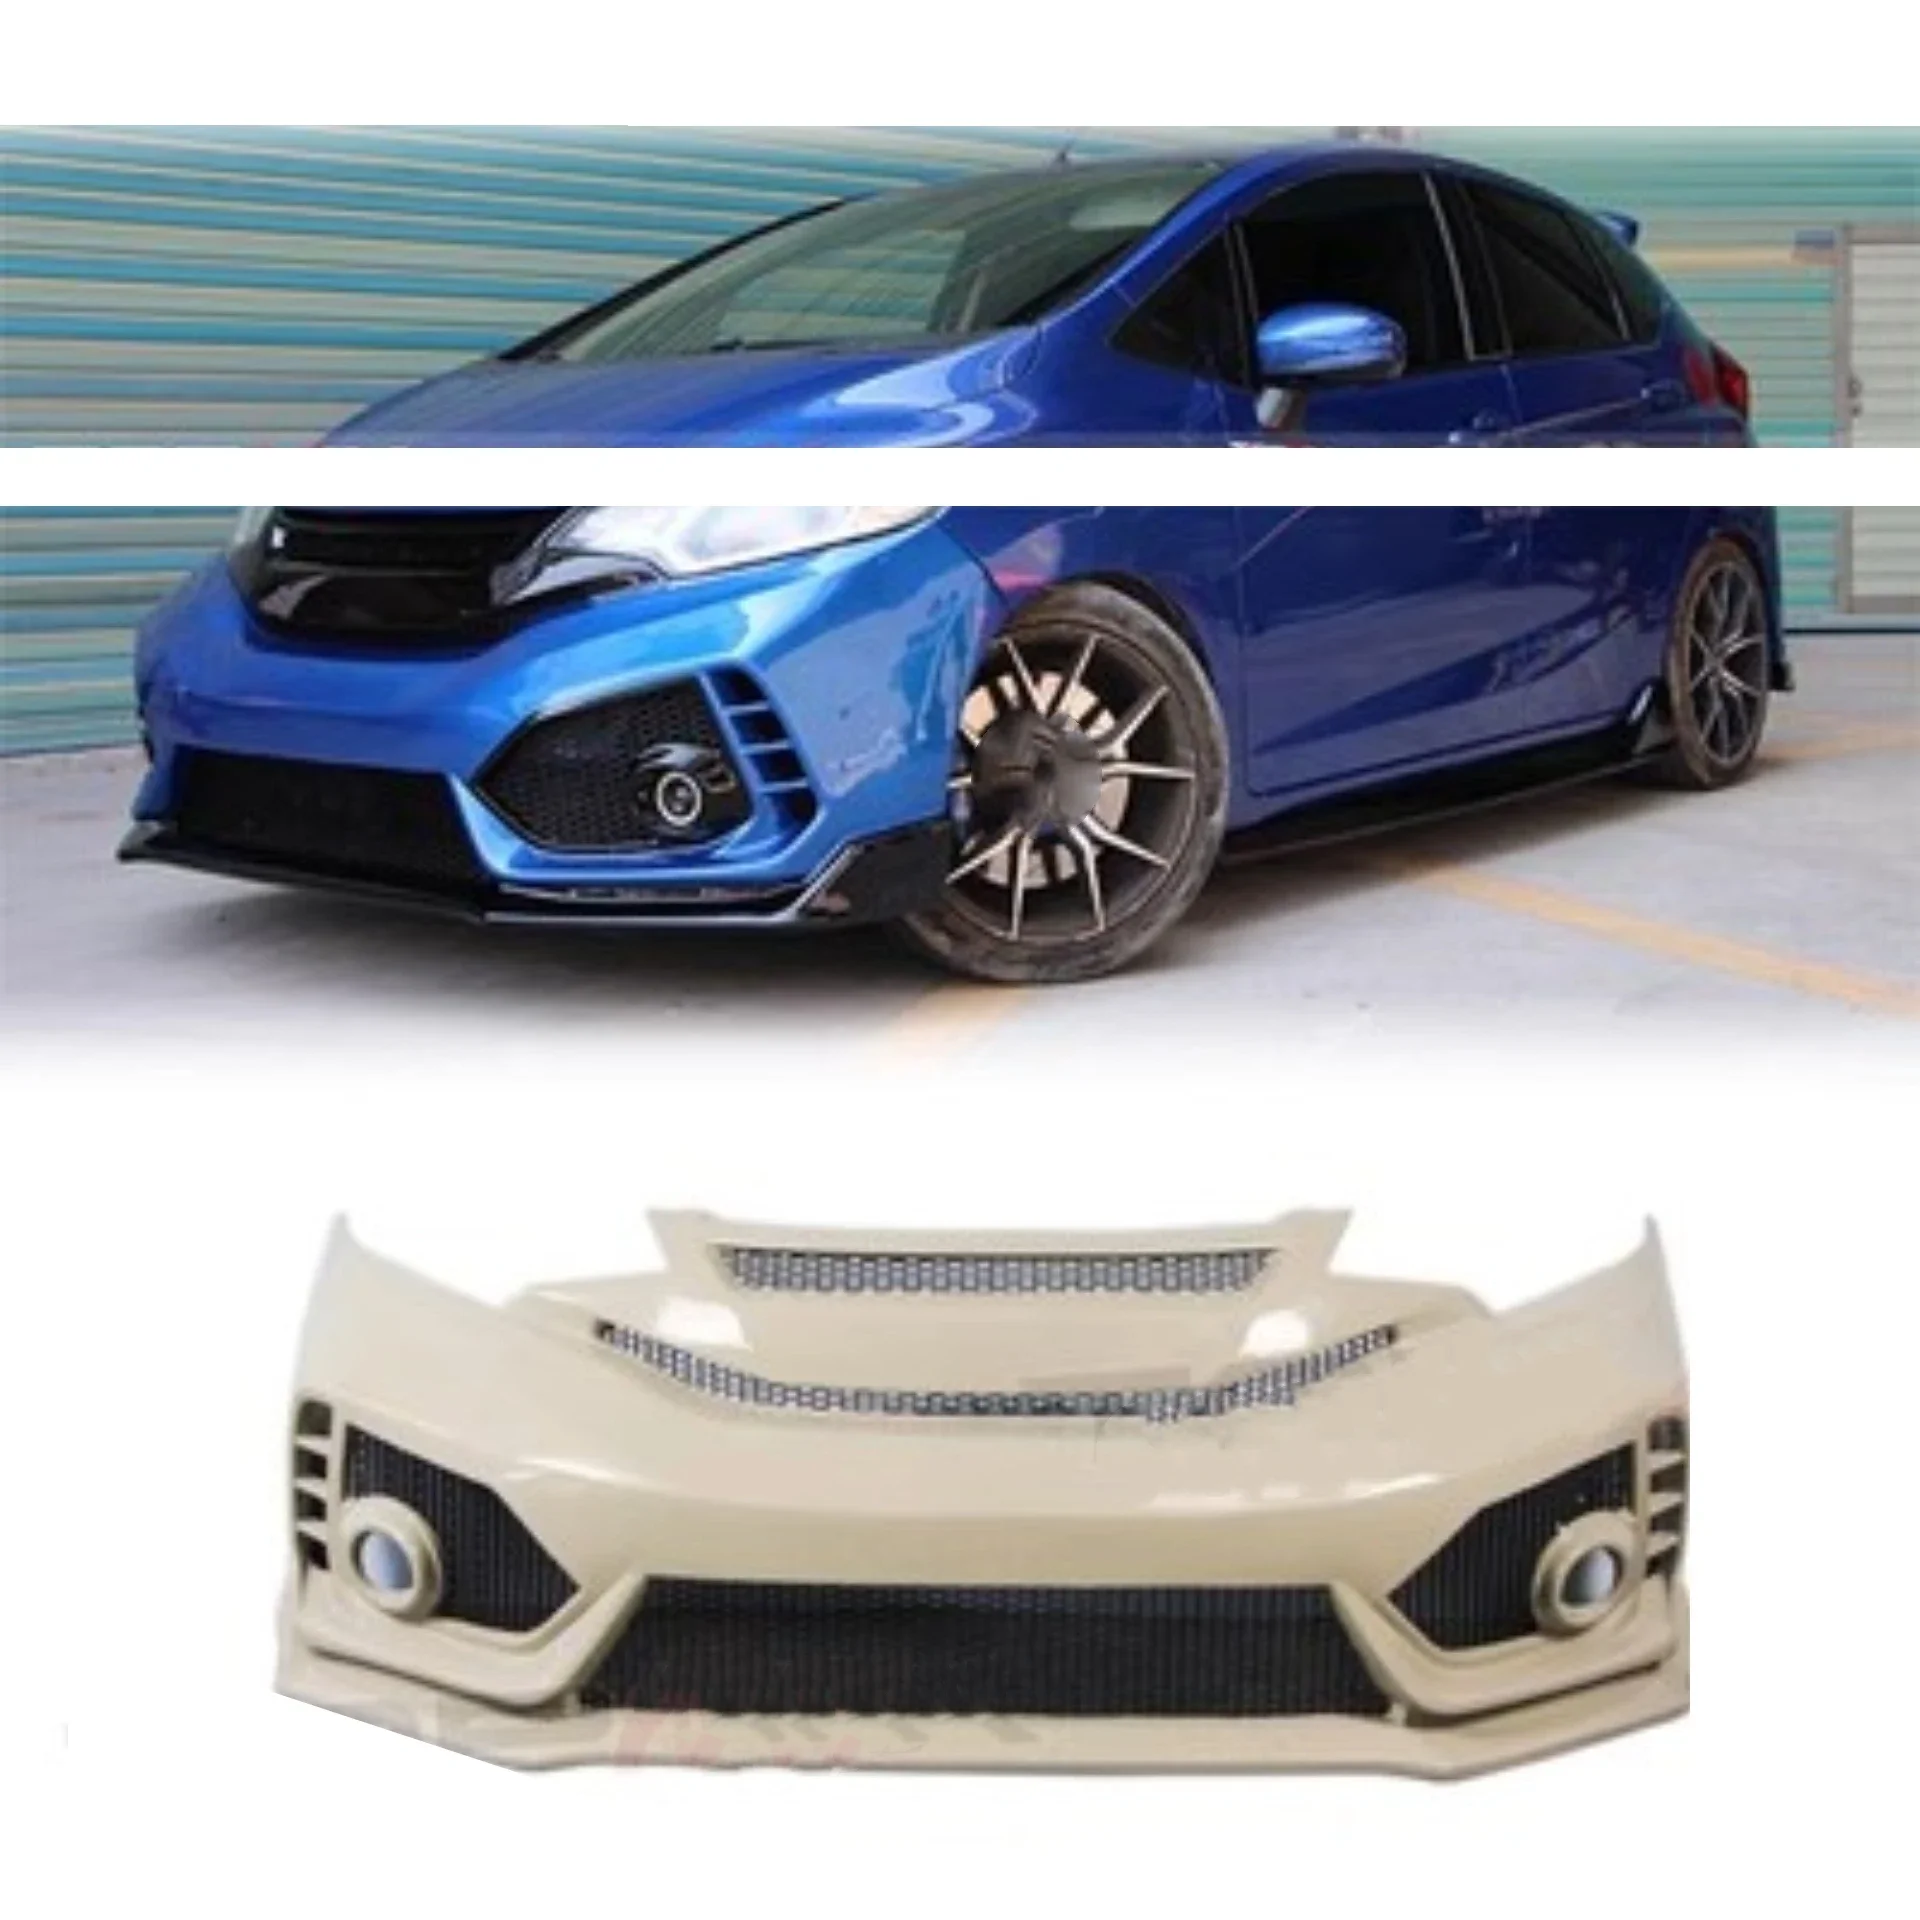 ABS Material Front Rear Bumper Side Skirt for Honda FIT JAZZ GK5 Convert Type-R Style Body Kit Car Accessories